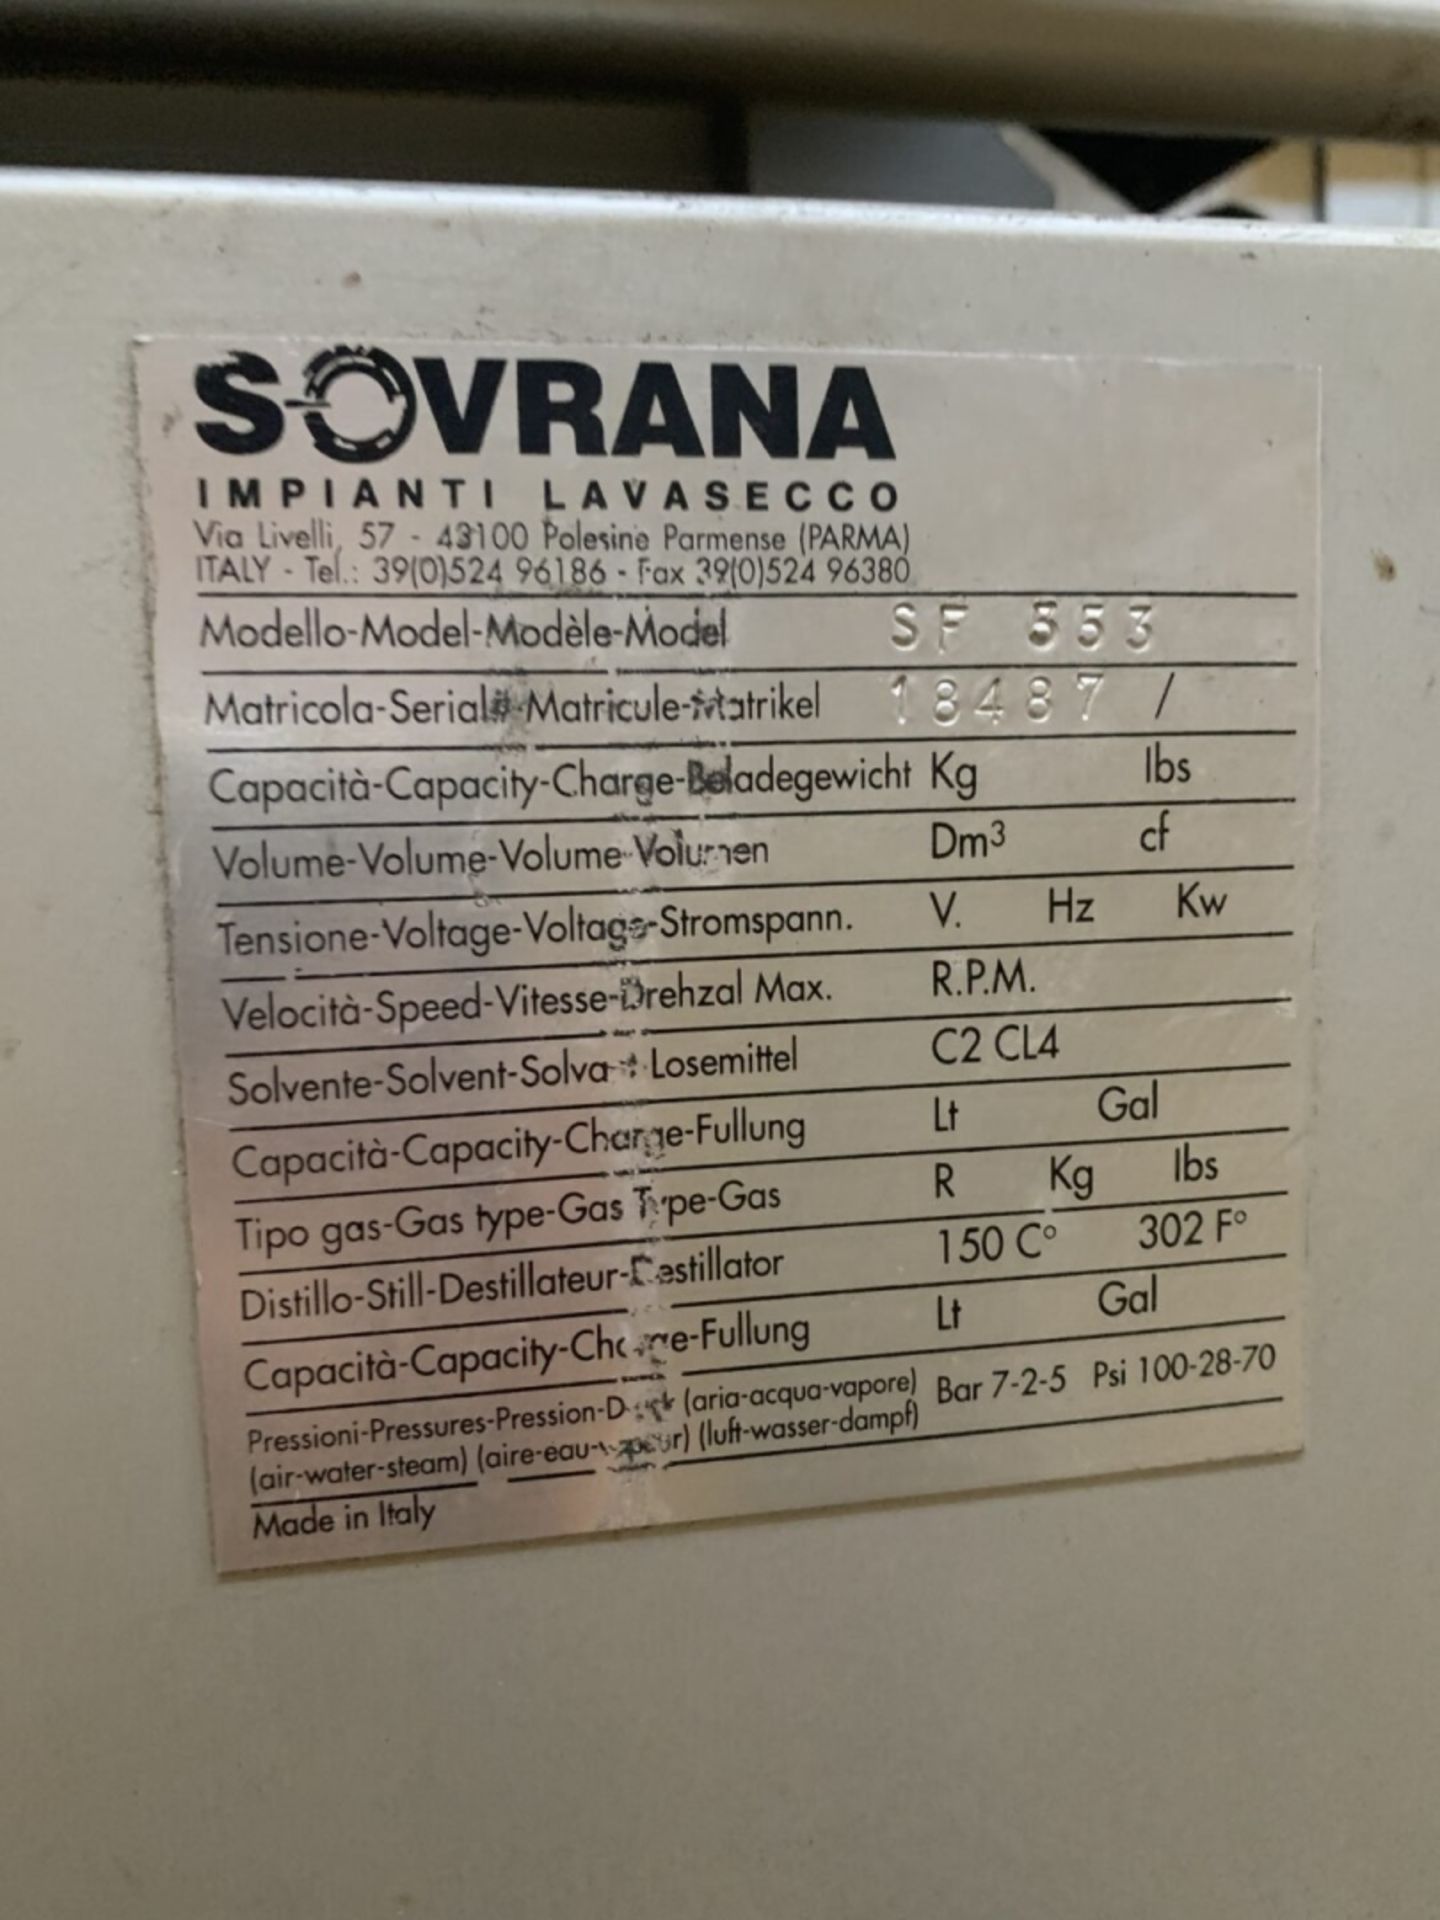 Sovrana Dry Cleaning Washing System SF 553 - Image 11 of 15